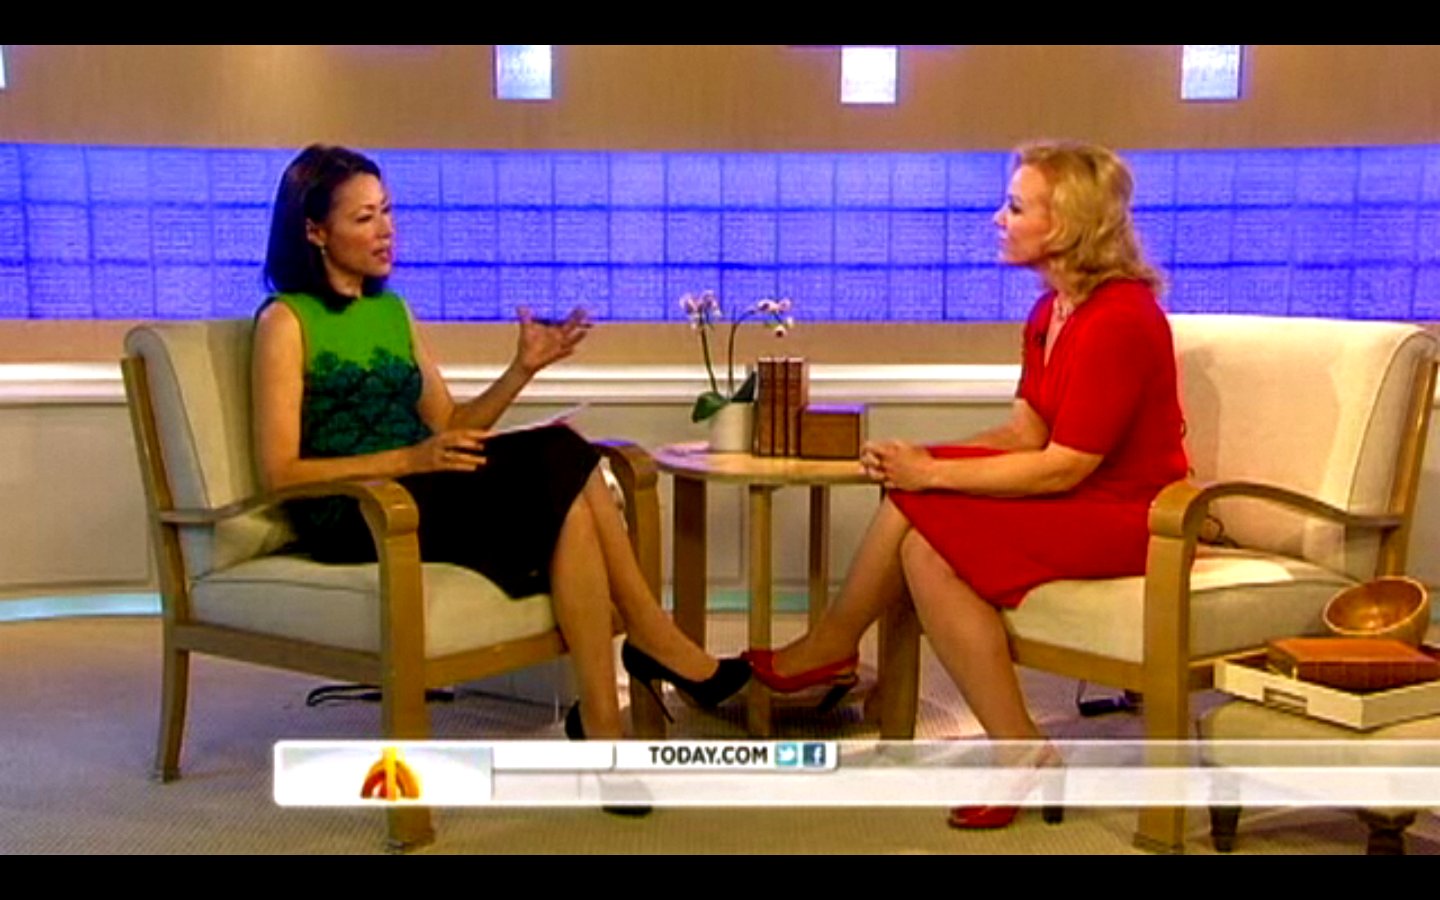 The Today Show, April 23rd, 2012 - Discussing the Isabel Celis case.